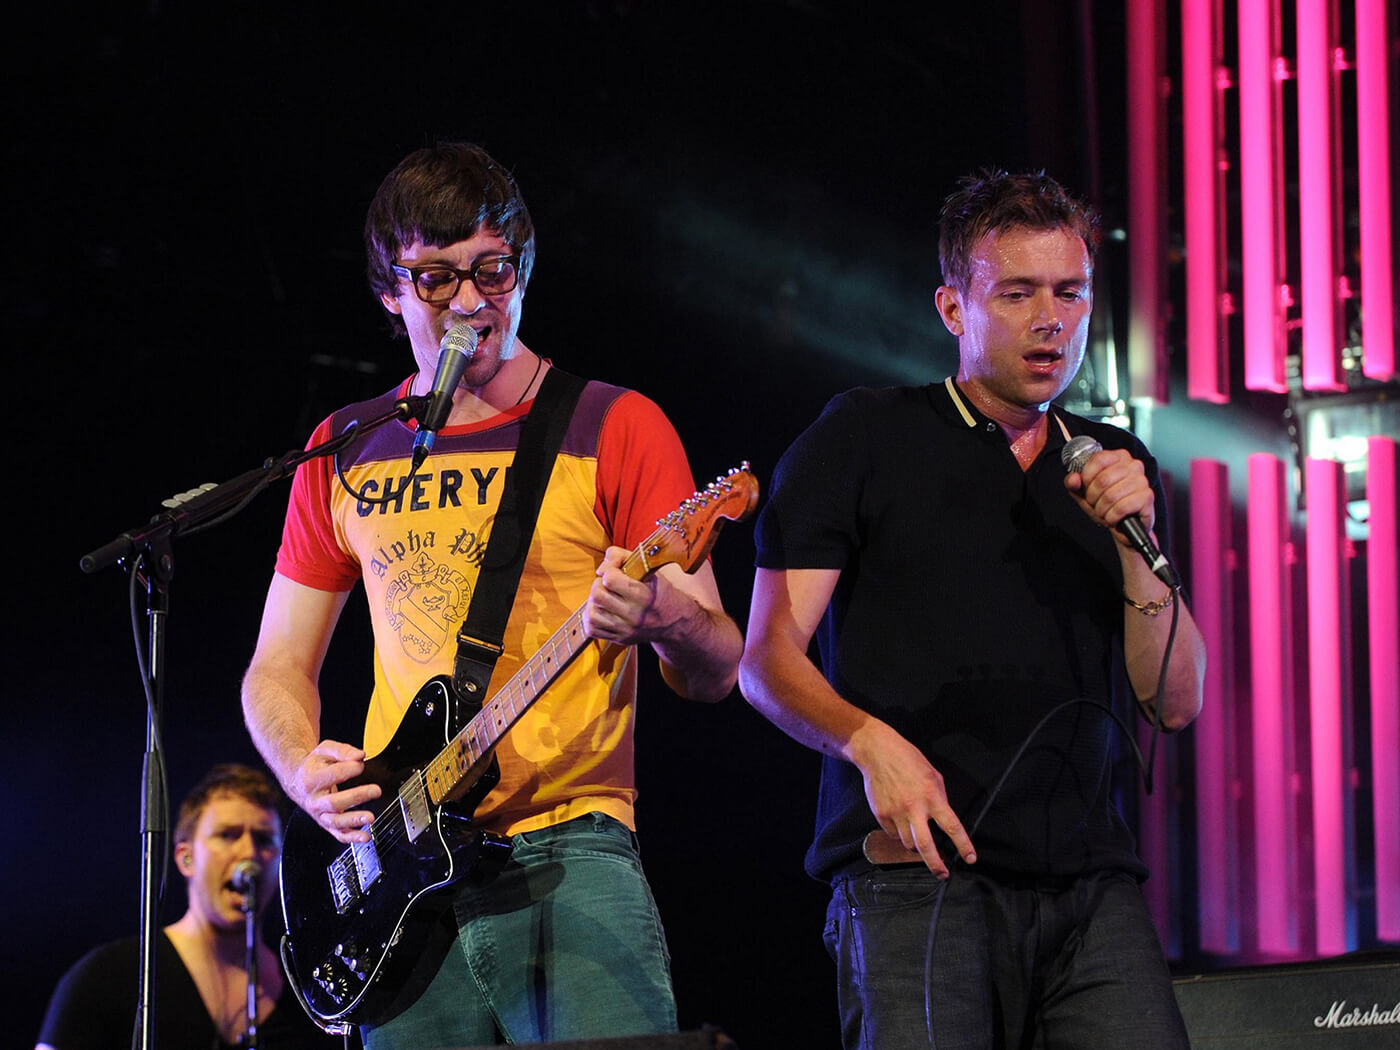 A newly-reformed Blur performing at Glastonbury in 2009